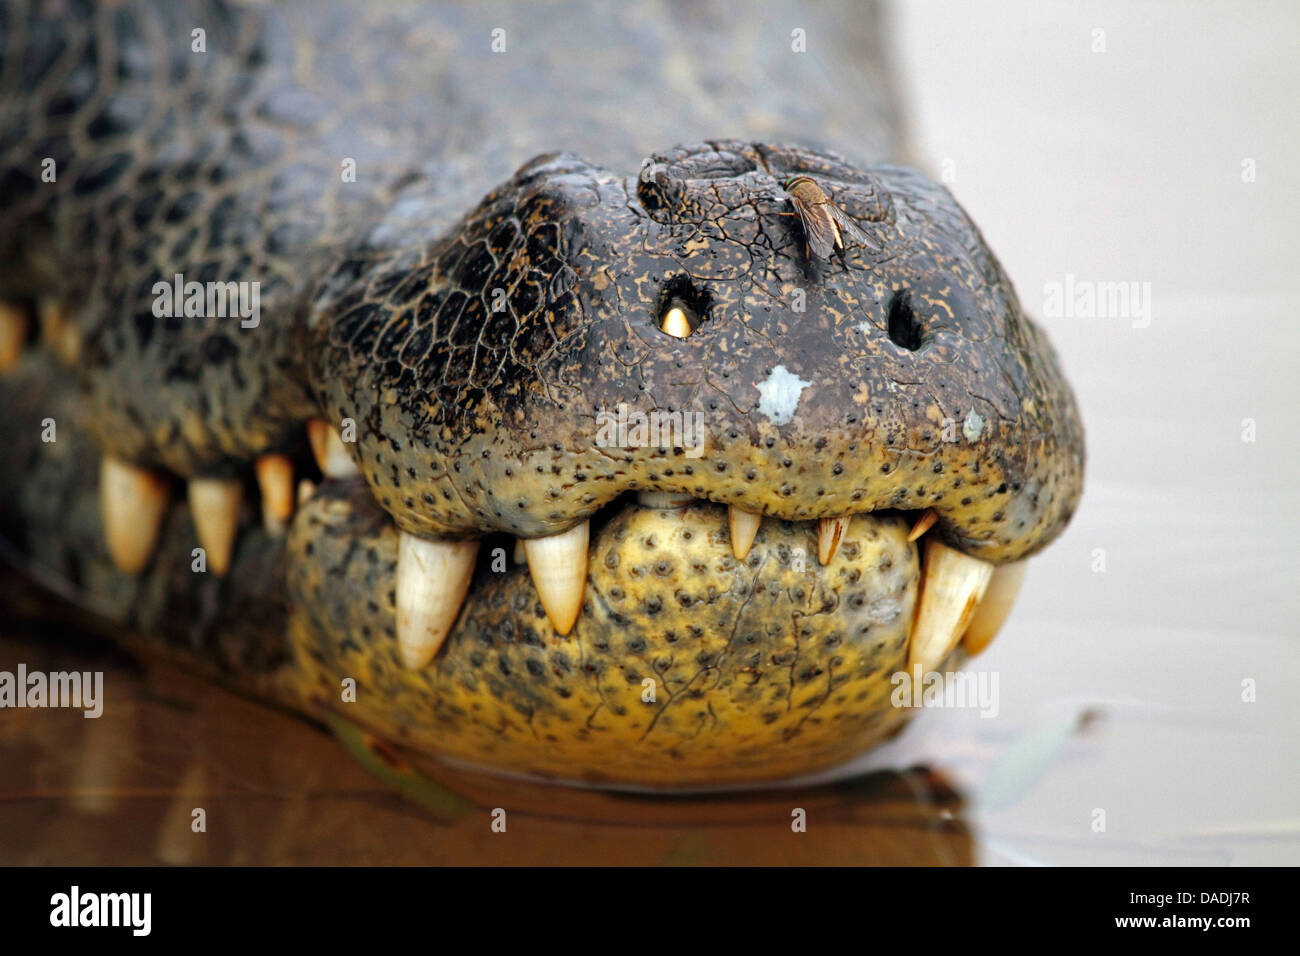 spectacled caiman (Caiman crocodilus), tooth peering through a nostril, Brazil, Mato Grosso, Pantanal Stock Photo